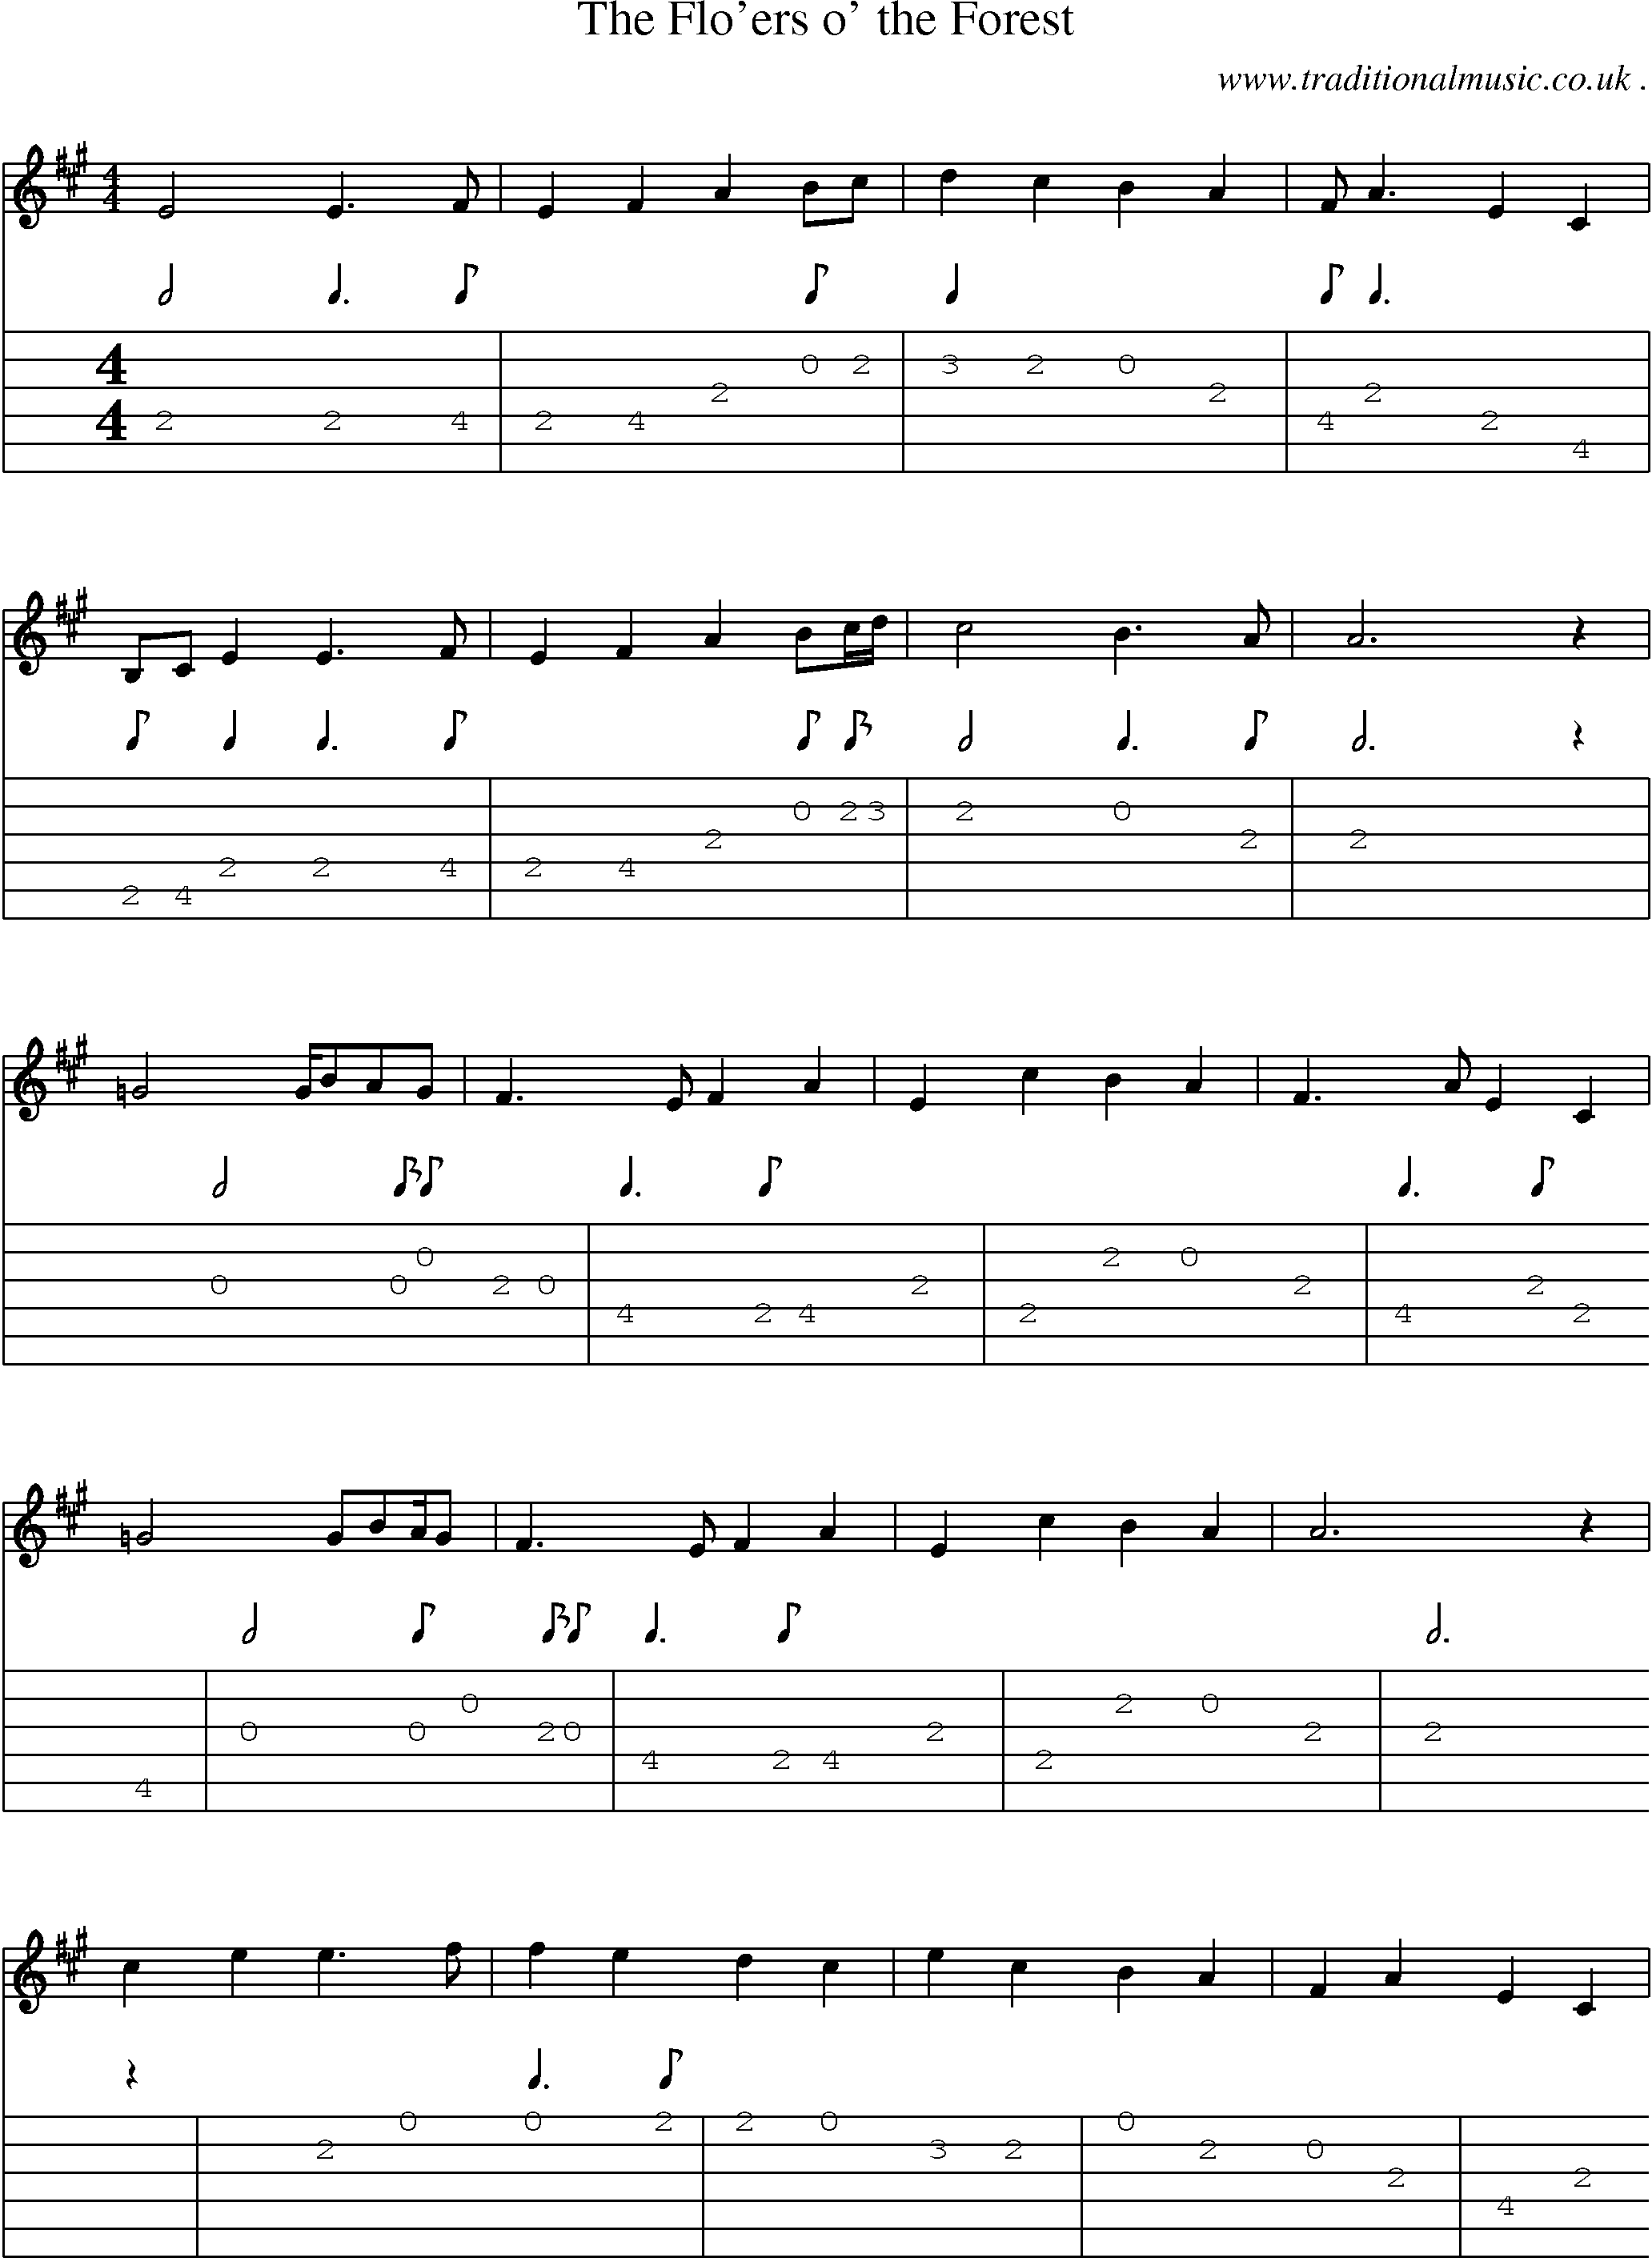 Sheet-music  score, Chords and Guitar Tabs for The Floers O The Forest